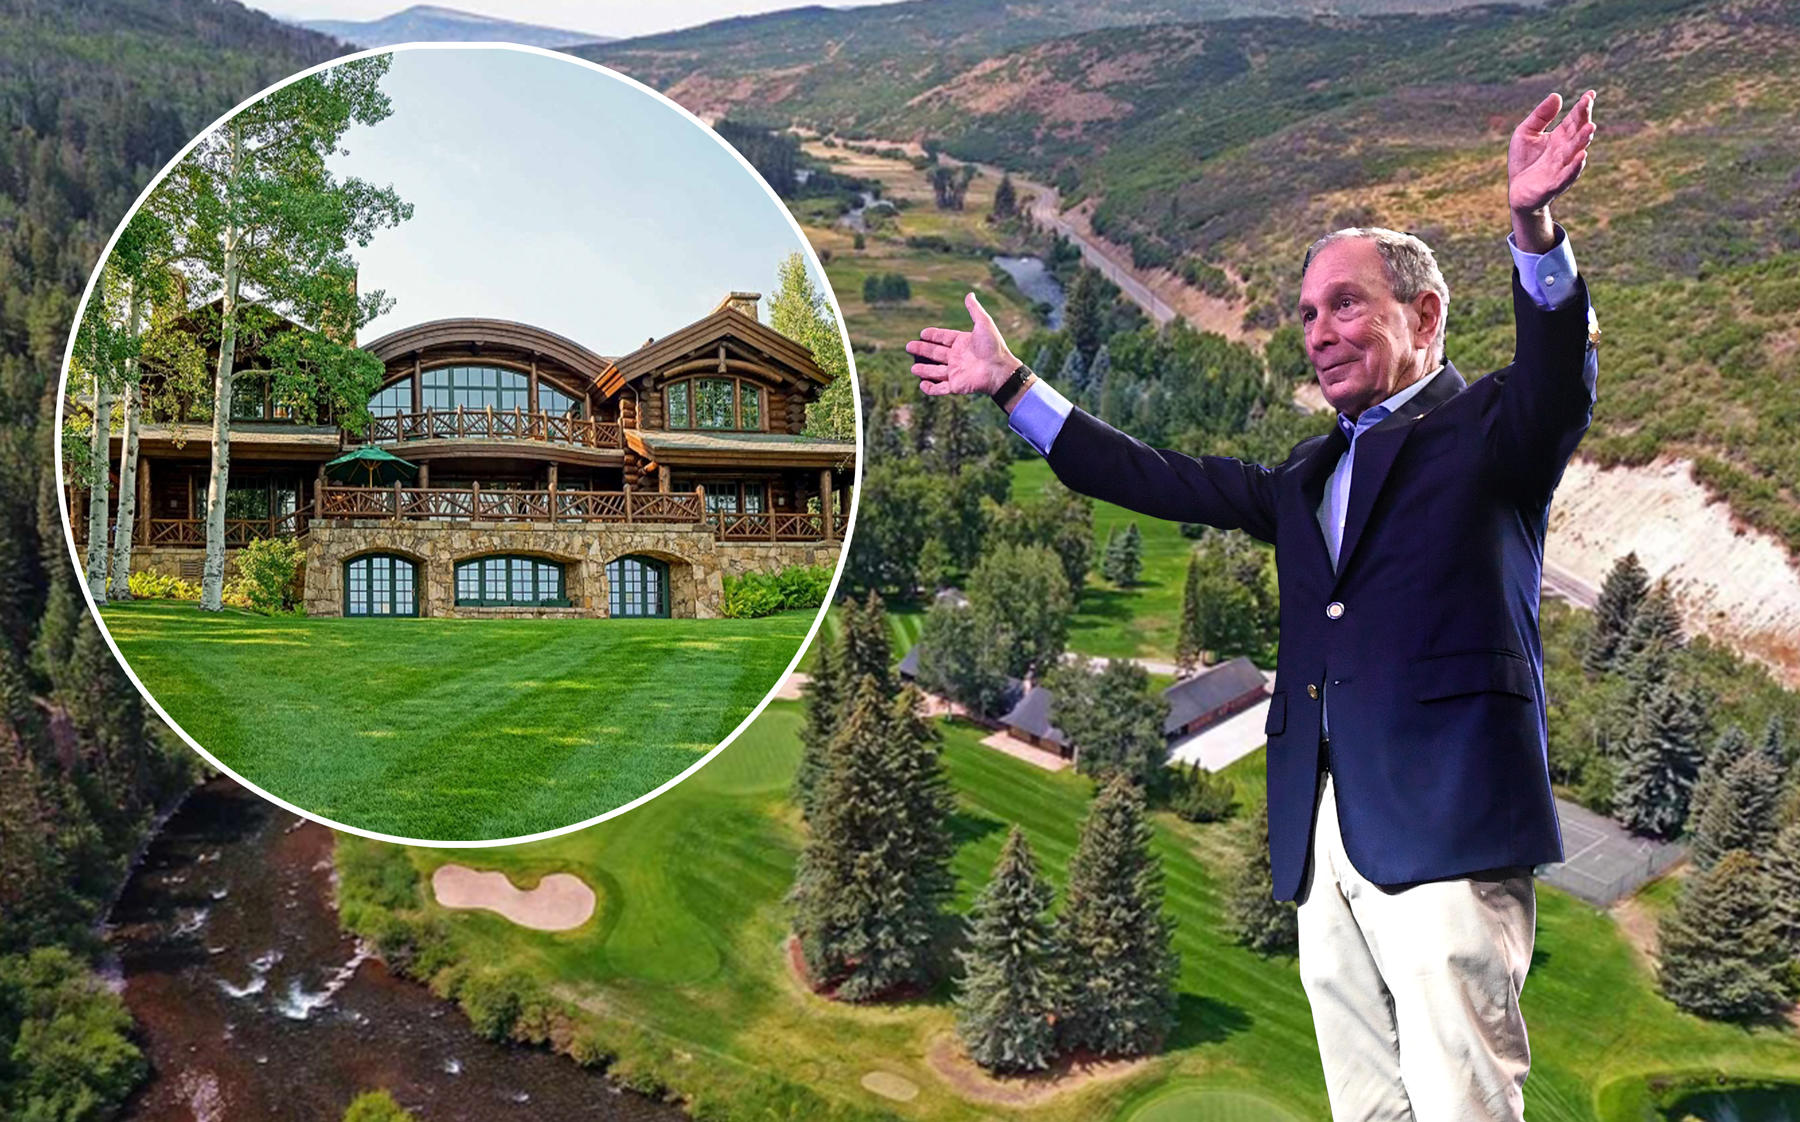 Michael Bloomberg and the Westlands in Meeker, Colorado (Credit: Bloomberg by Toni L. Sandys/The Washington Post via Getty Images)